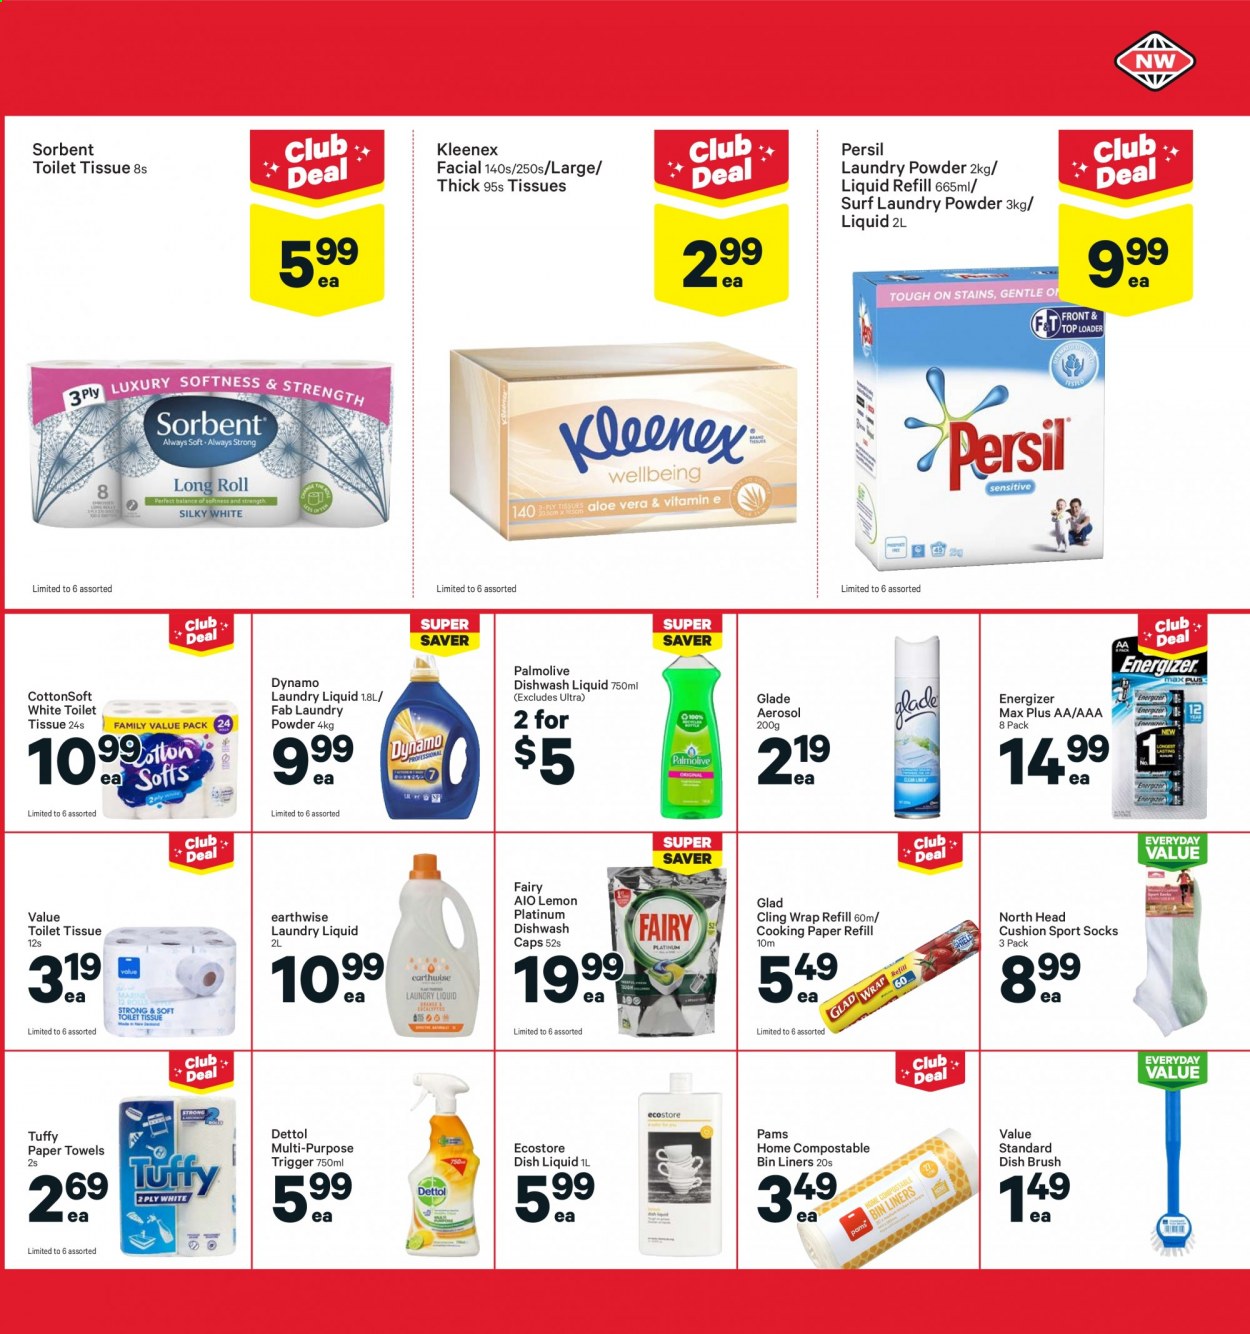 thumbnail - New World mailer - 02.08.2021 - 08.08.2021 - Sales products - Dettol, Kleenex, toilet paper, kitchen towels, paper towels, Palmolive. Page 29.